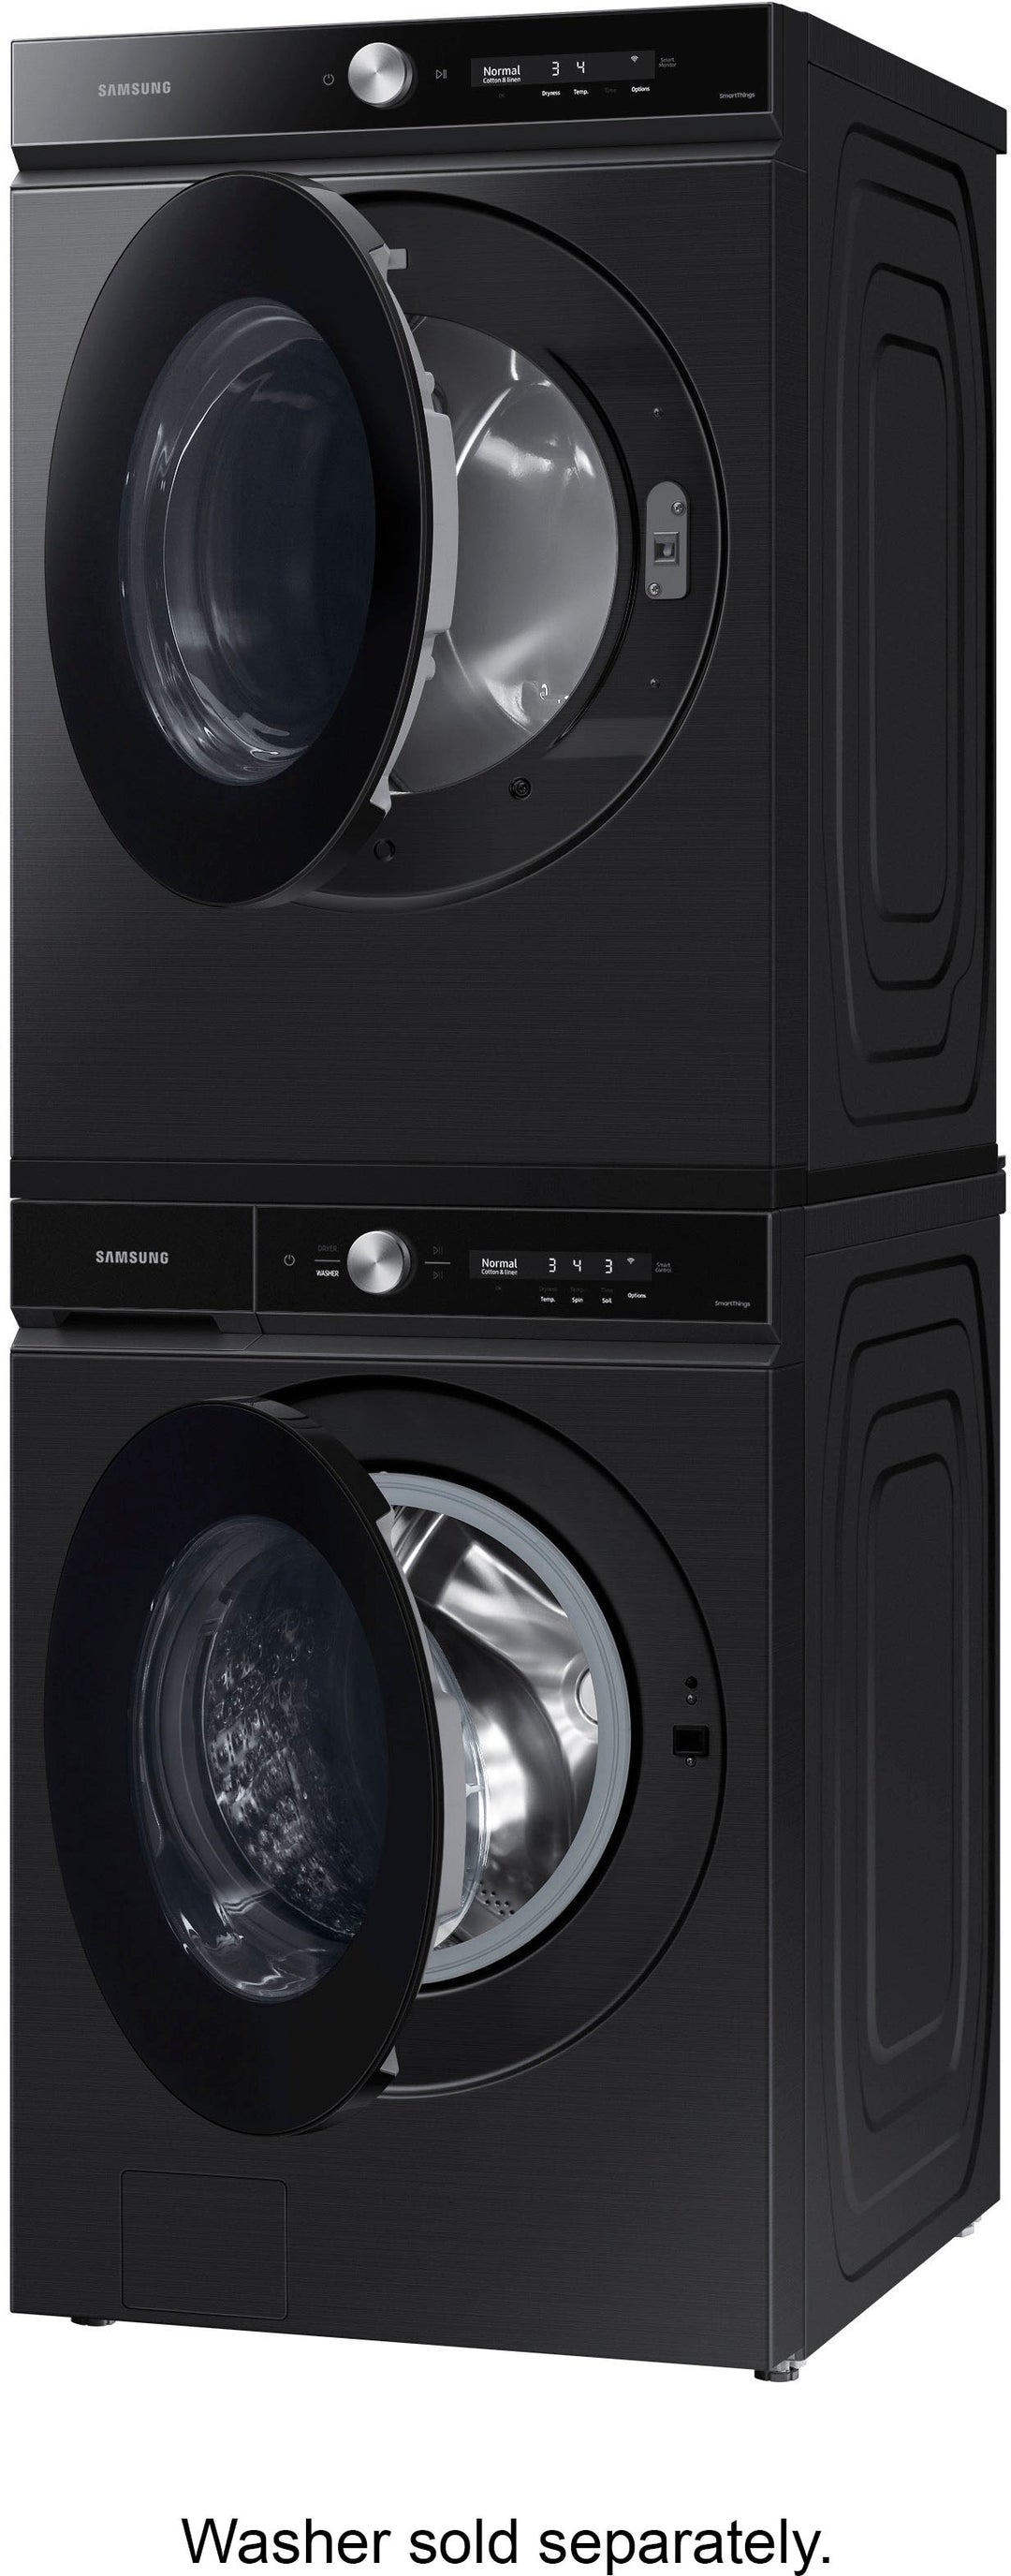 Samsung - Bespoke 7.6 cu. ft. Ultra Capacity Gas Dryer with Super Speed Dry and AI Smart Dial - Brushed black_8